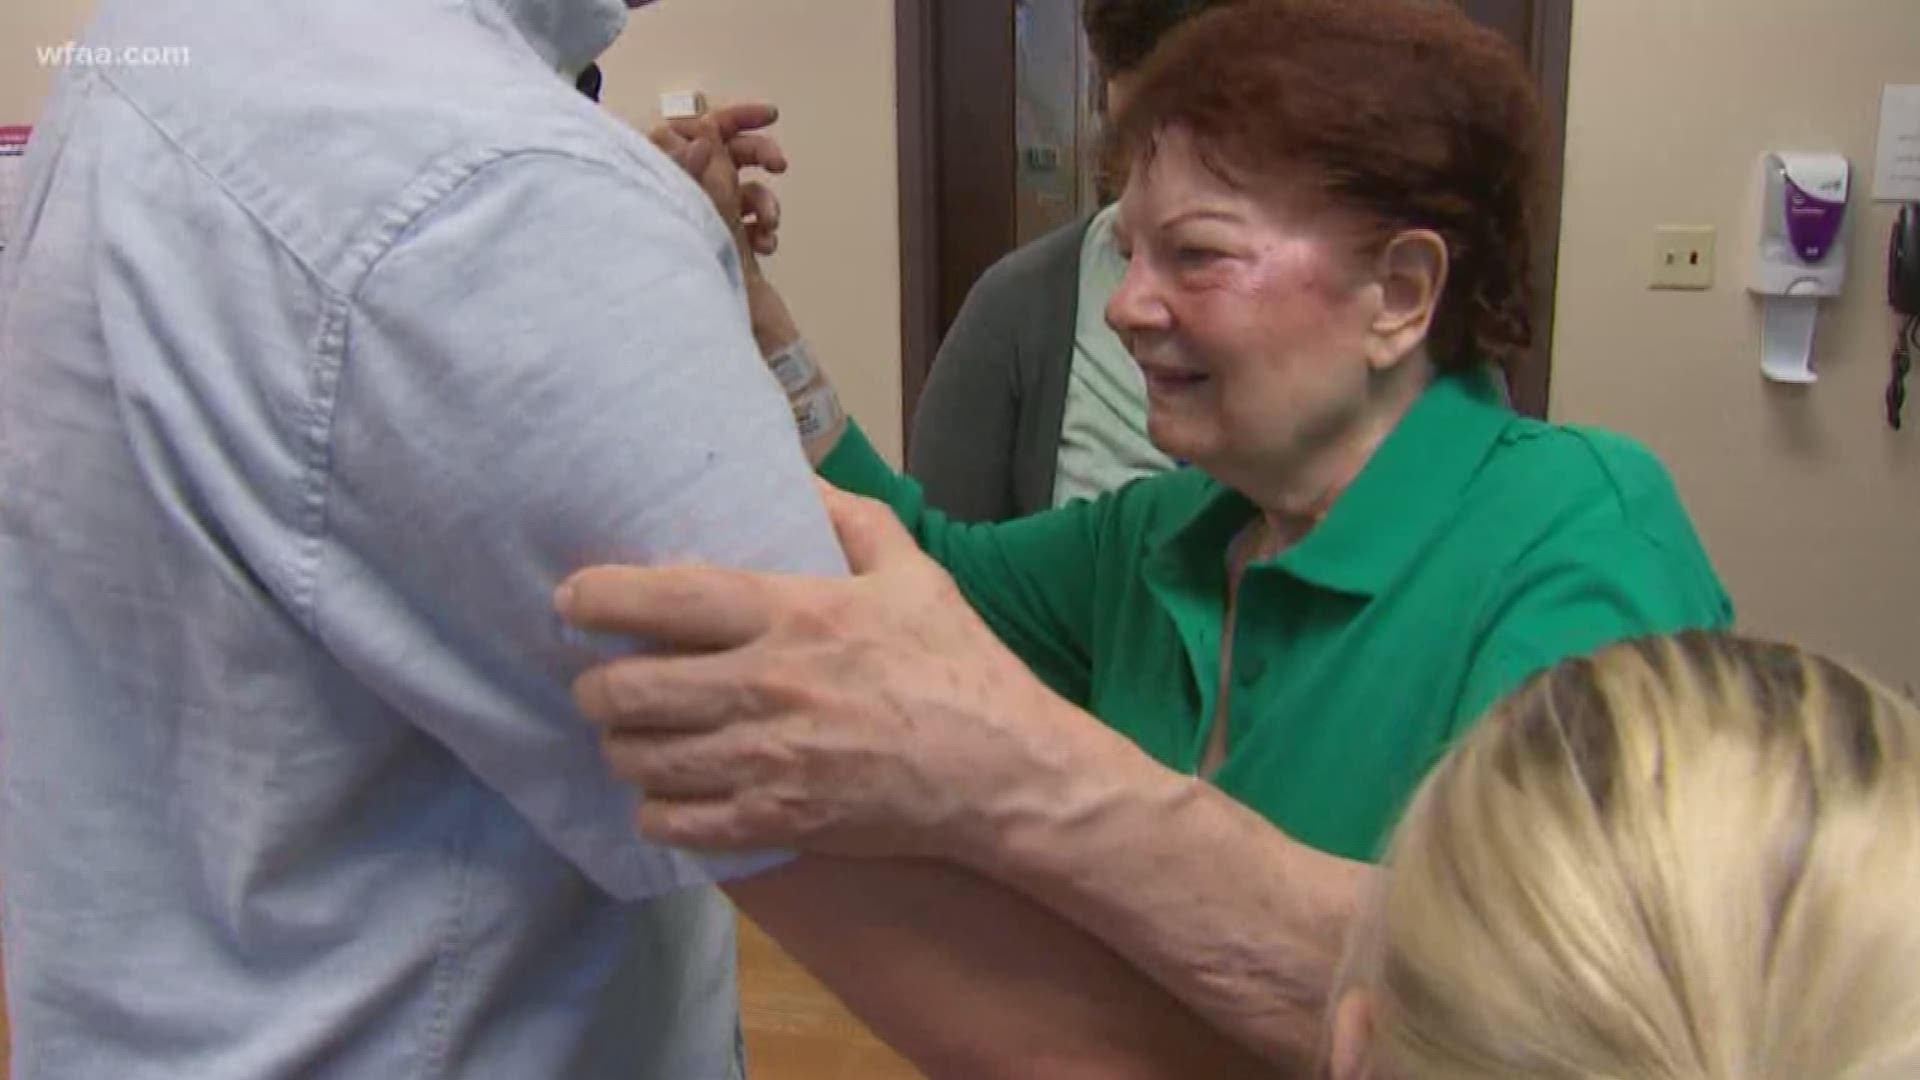 Ballroom dancing used as therapy for stroke patient